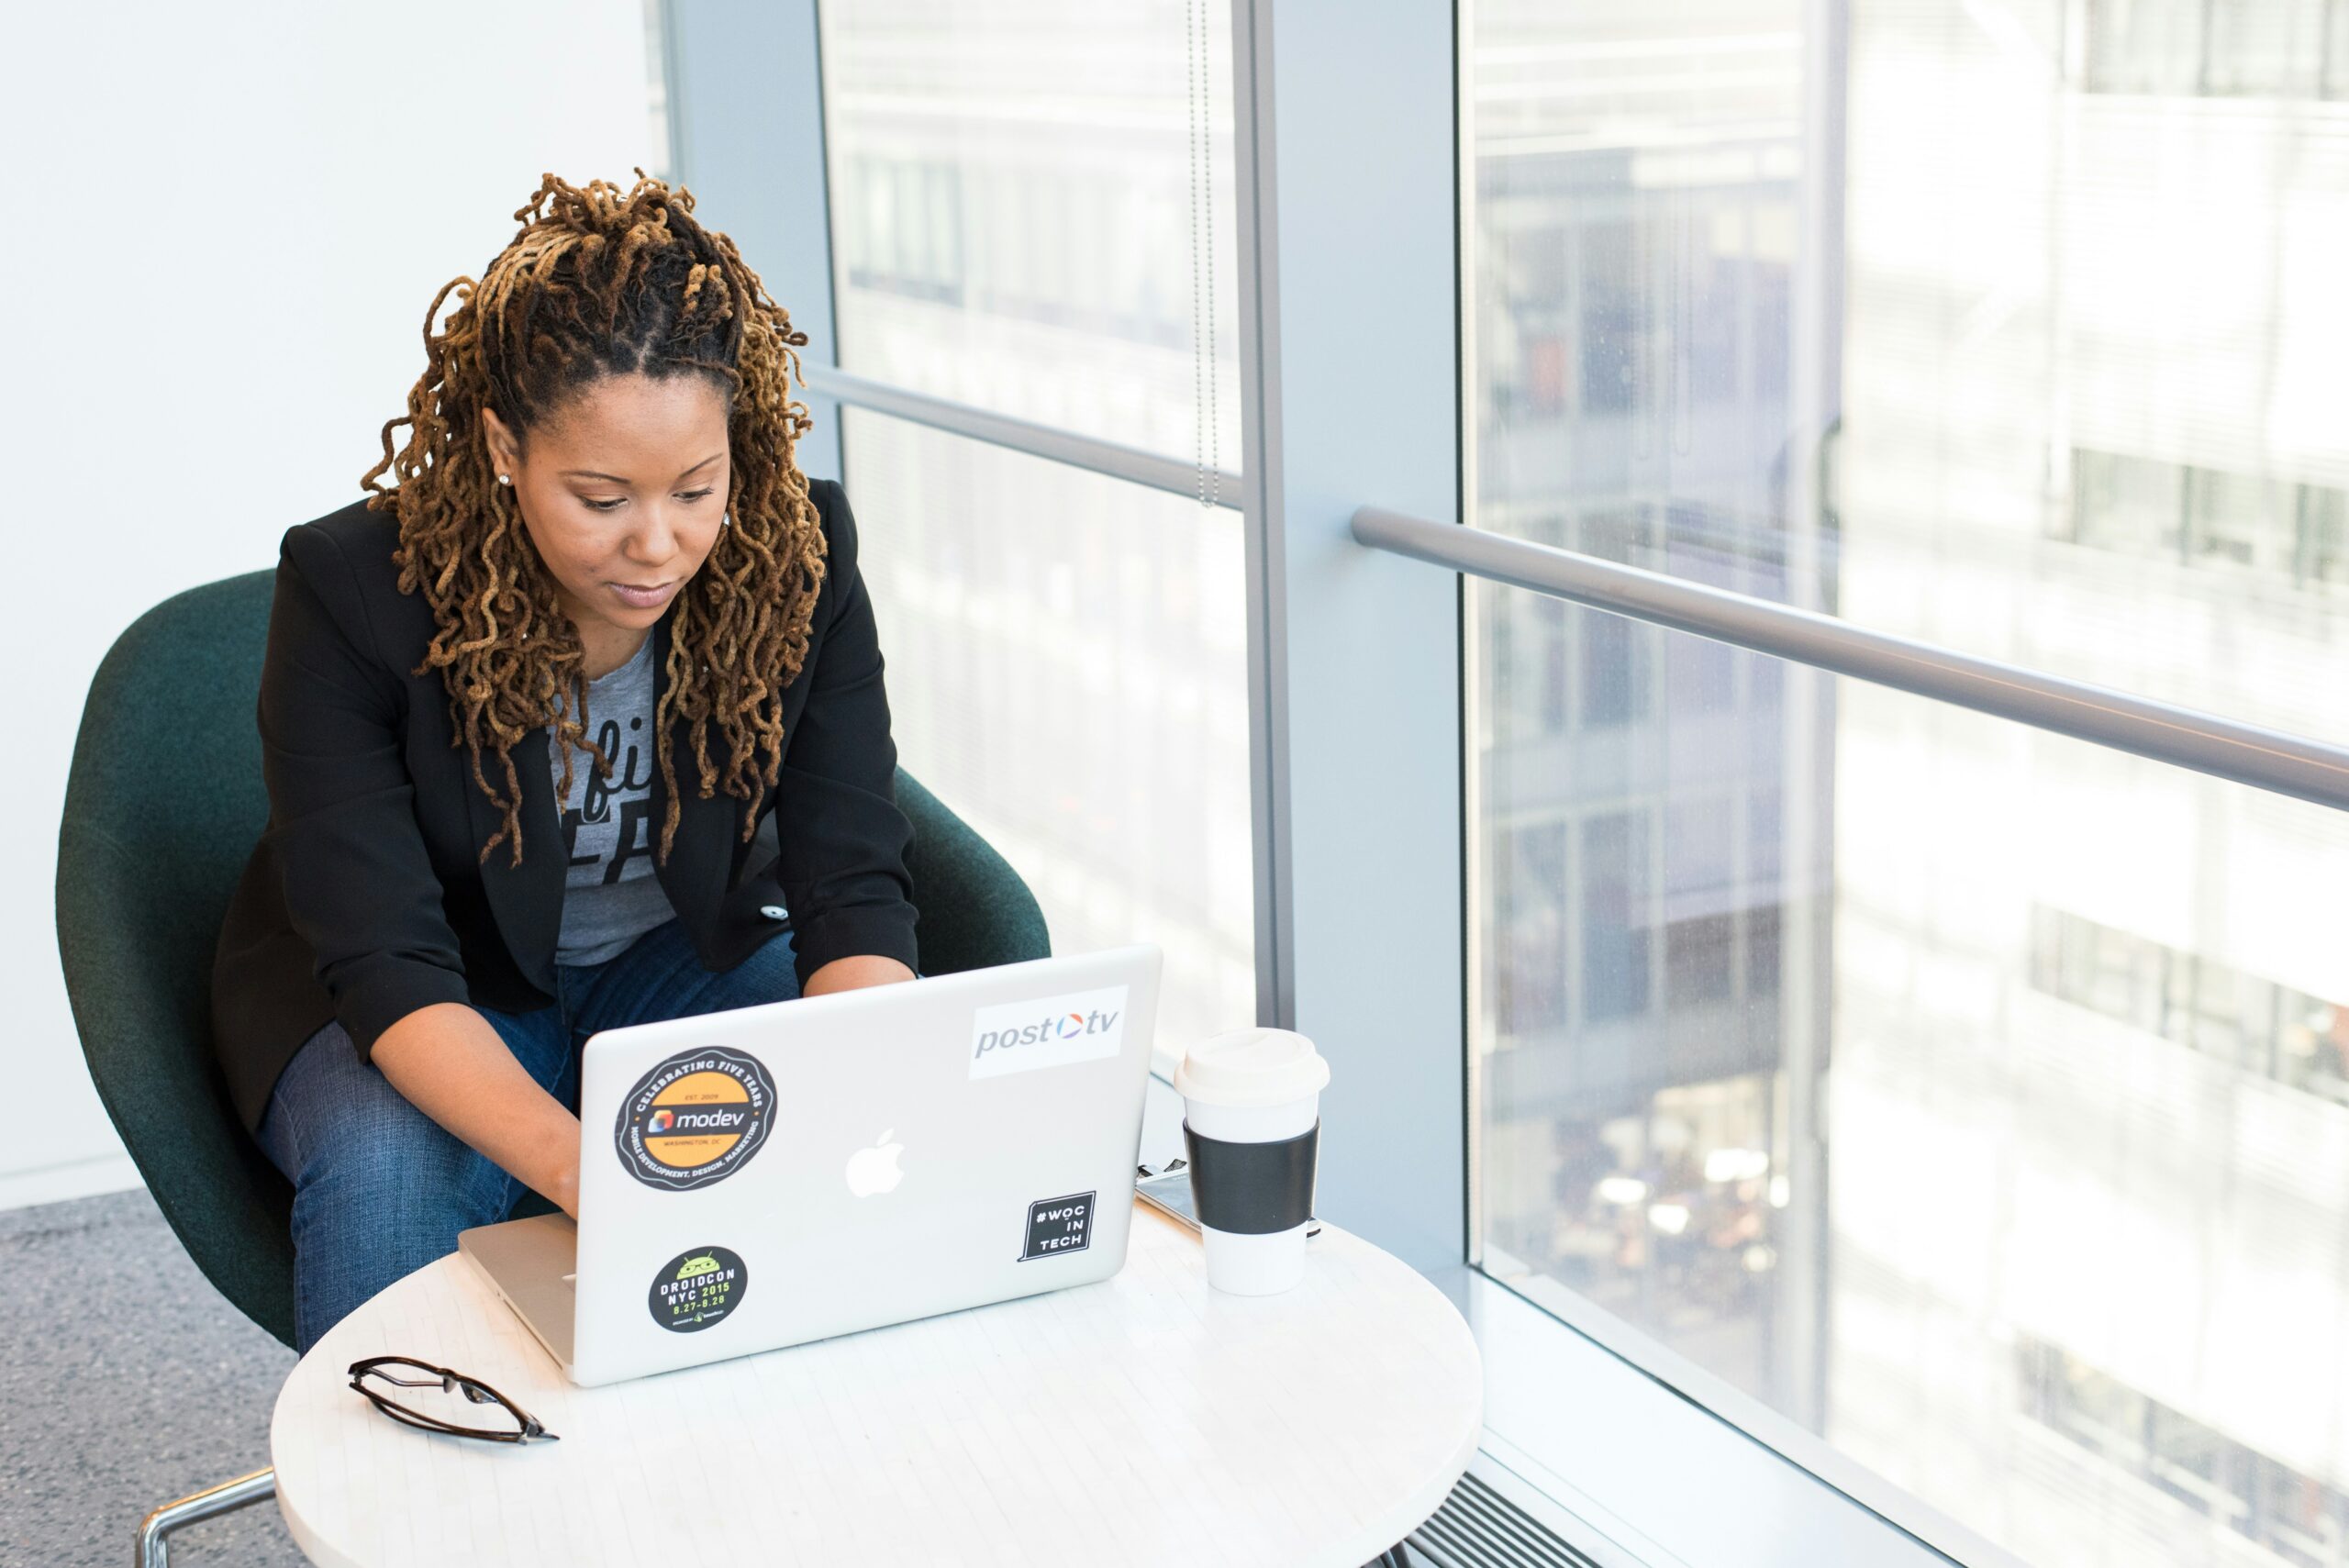 A woman sits at a small table in an office, working on a laptop adorned with stickers, with a coffee cup beside her and a city view through the window, focusing on why tech consulting is pivotal.